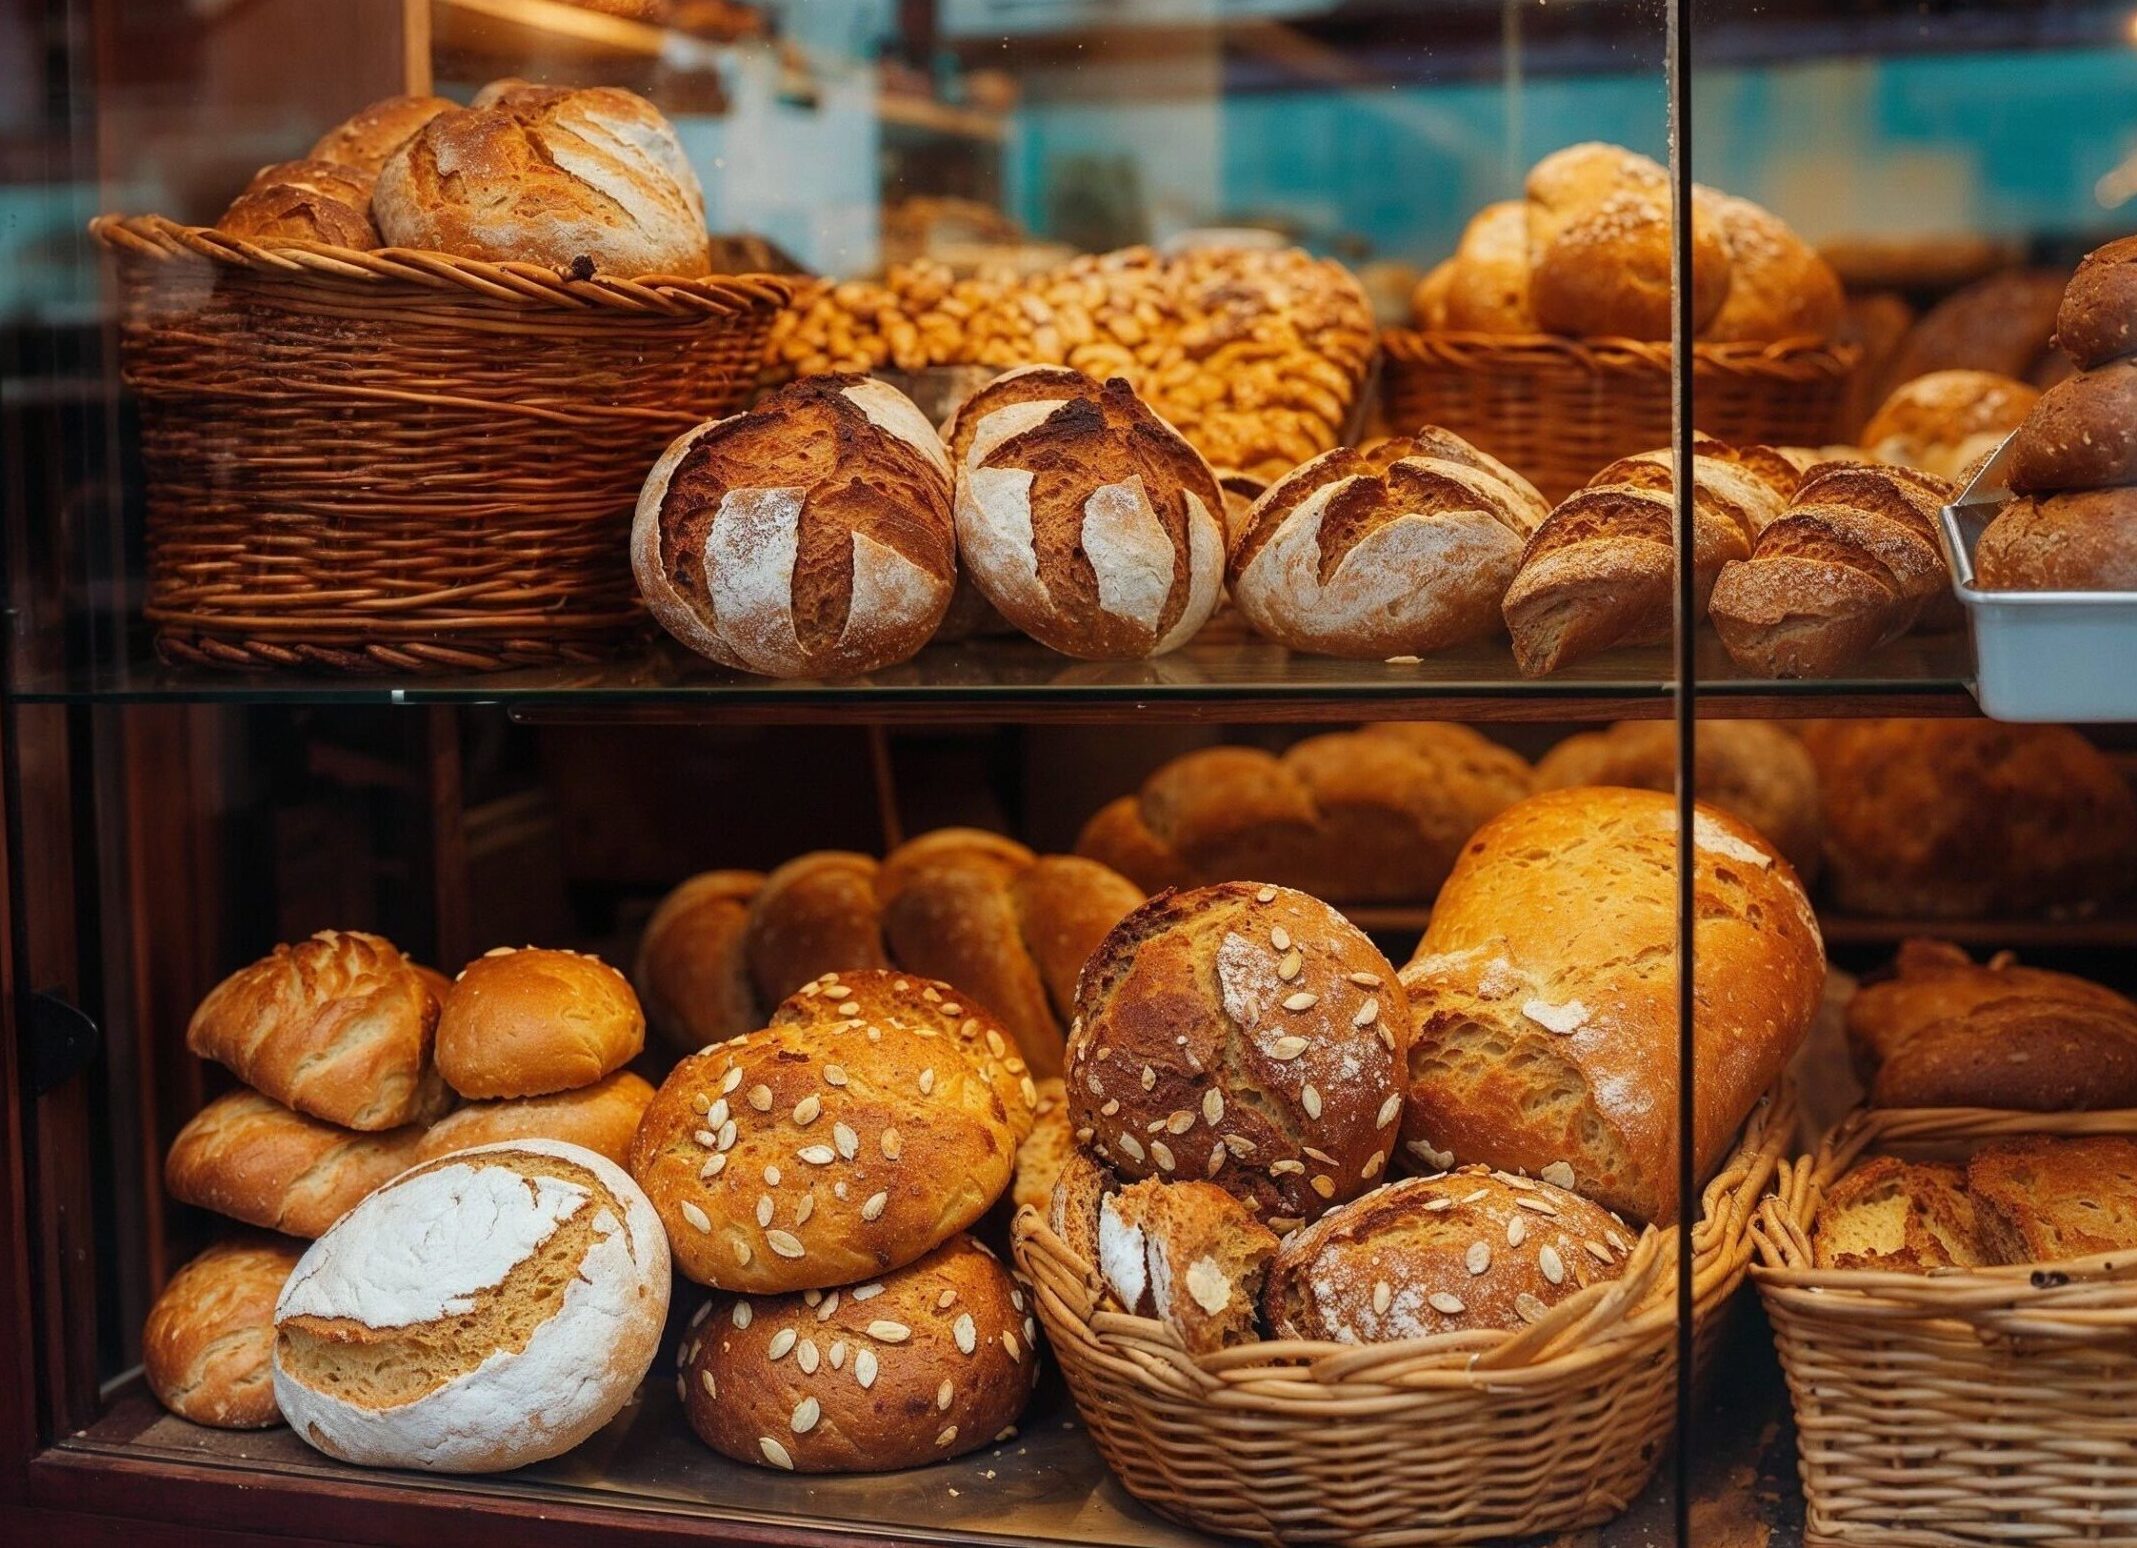 Many loaves of fresh-baked bread in a bakery display case